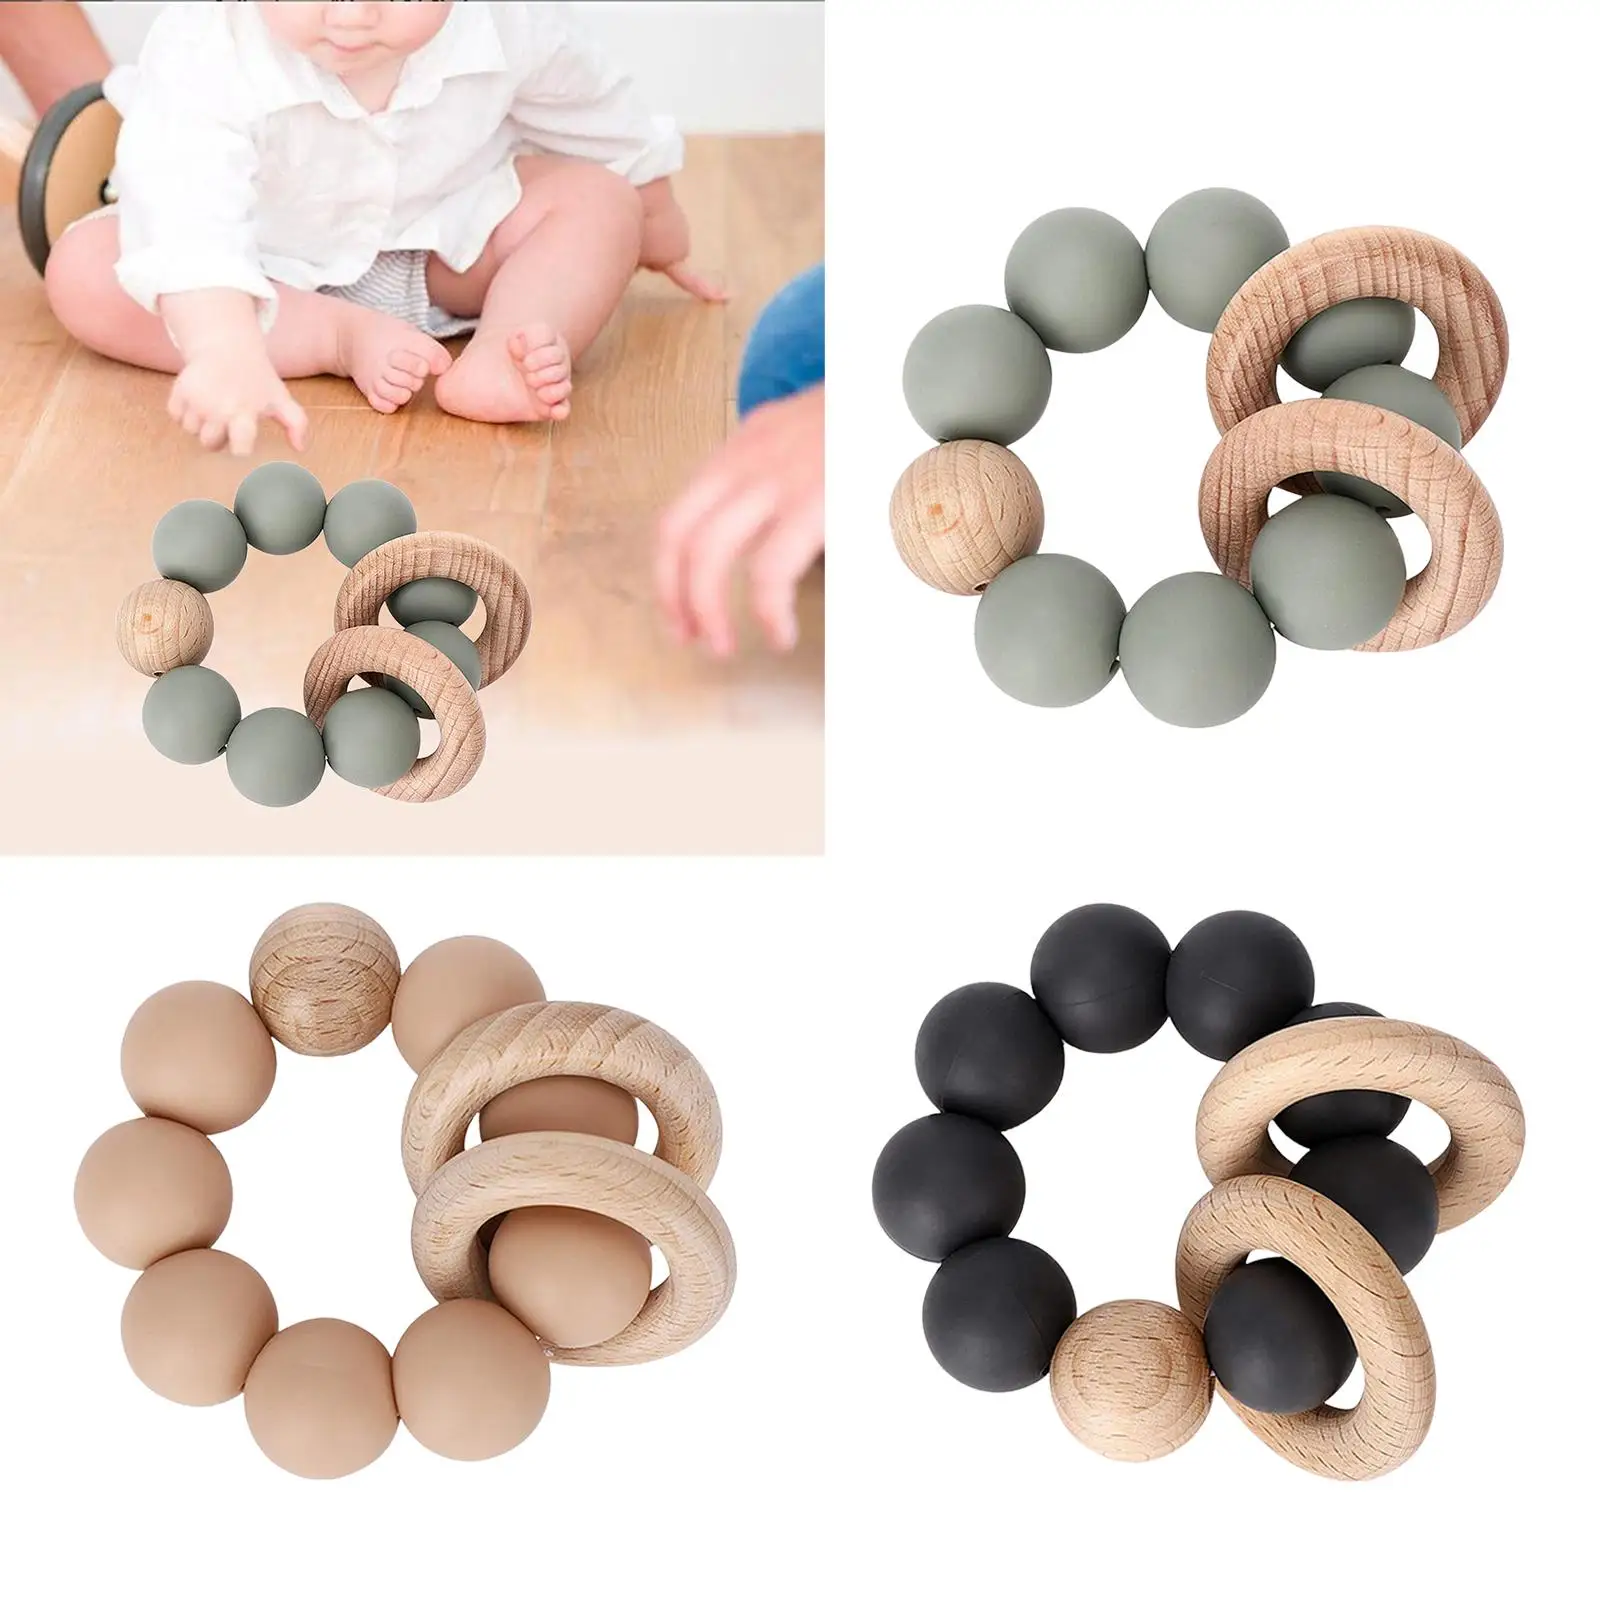 Teething Beads Relieve Discomfort Baby Molars No Burrs Beads Baby Teething Toys Chewbead for Newborn Shower Gifts Boys Girls